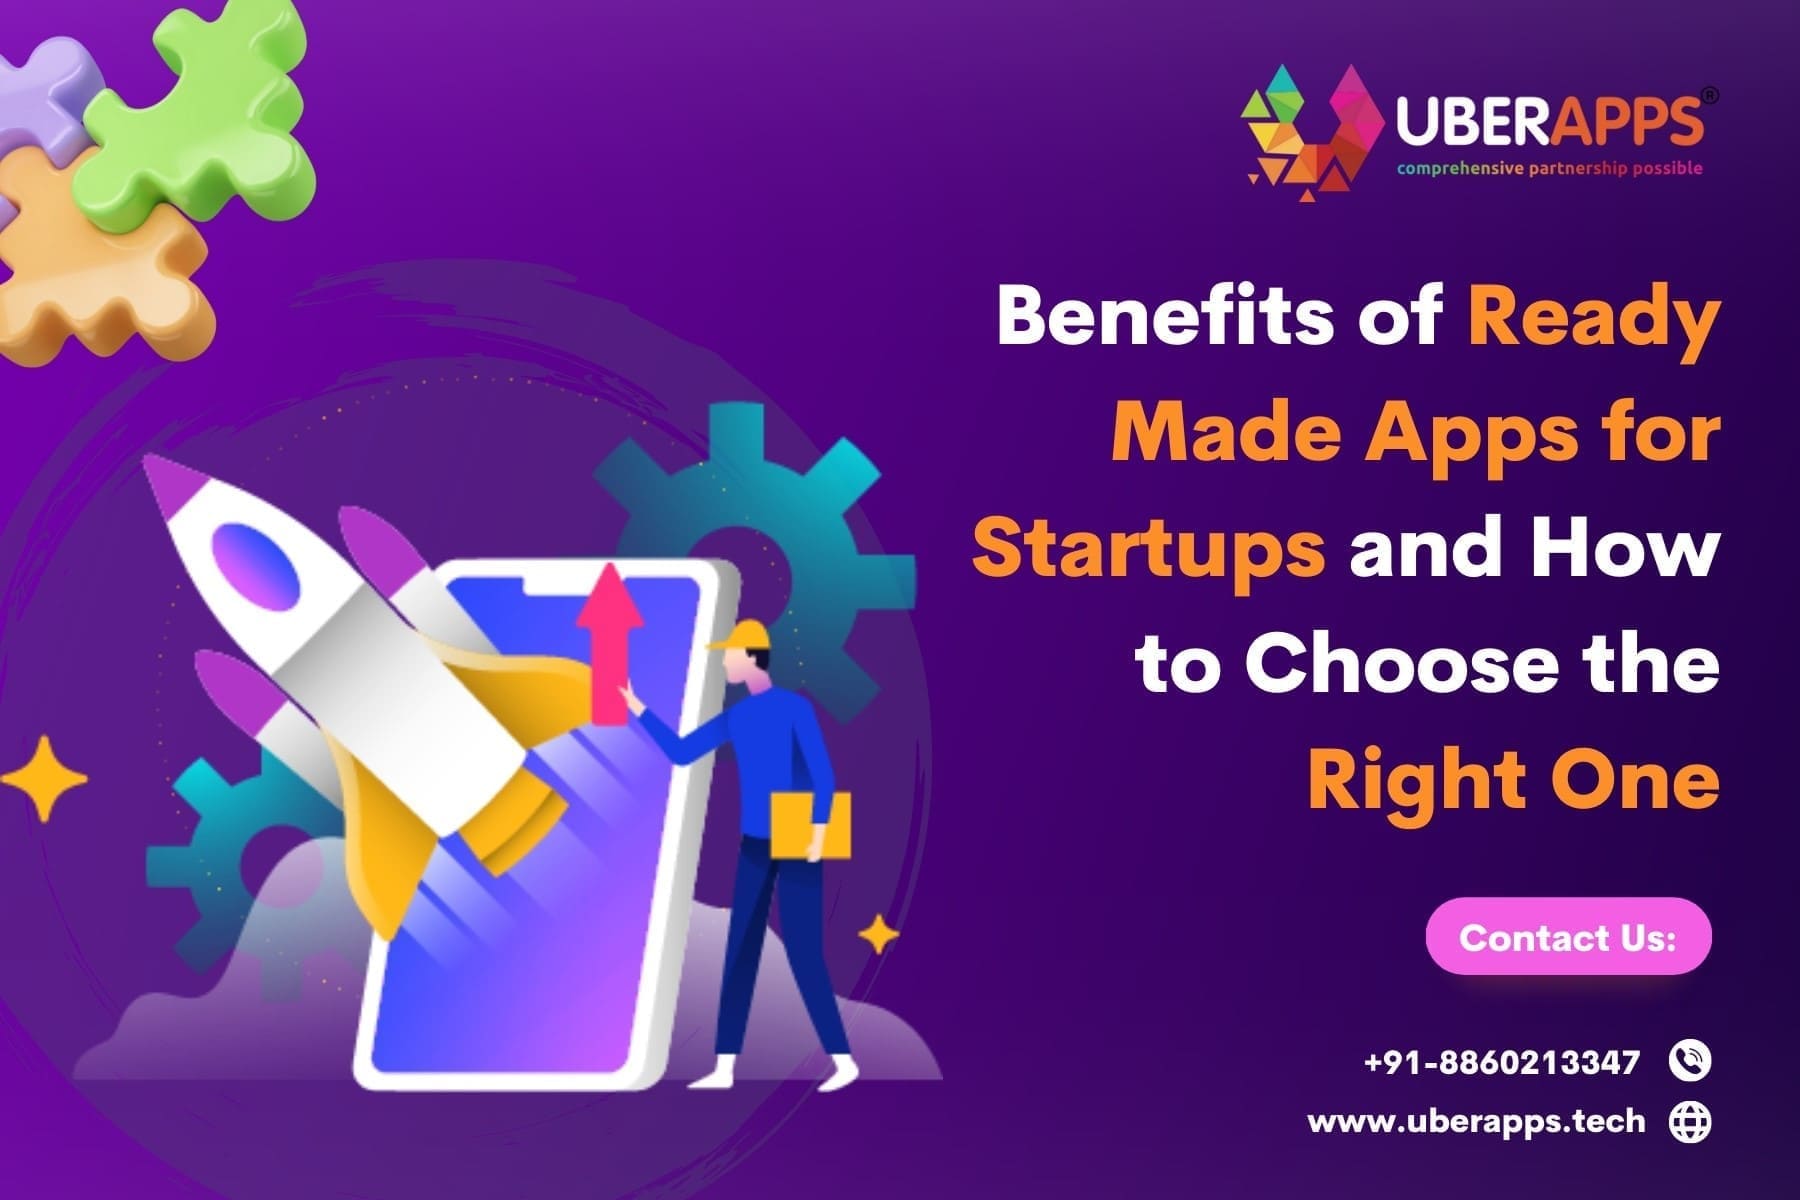 Benefits of Ready-Made Apps for Startups and How to Choose the Right One